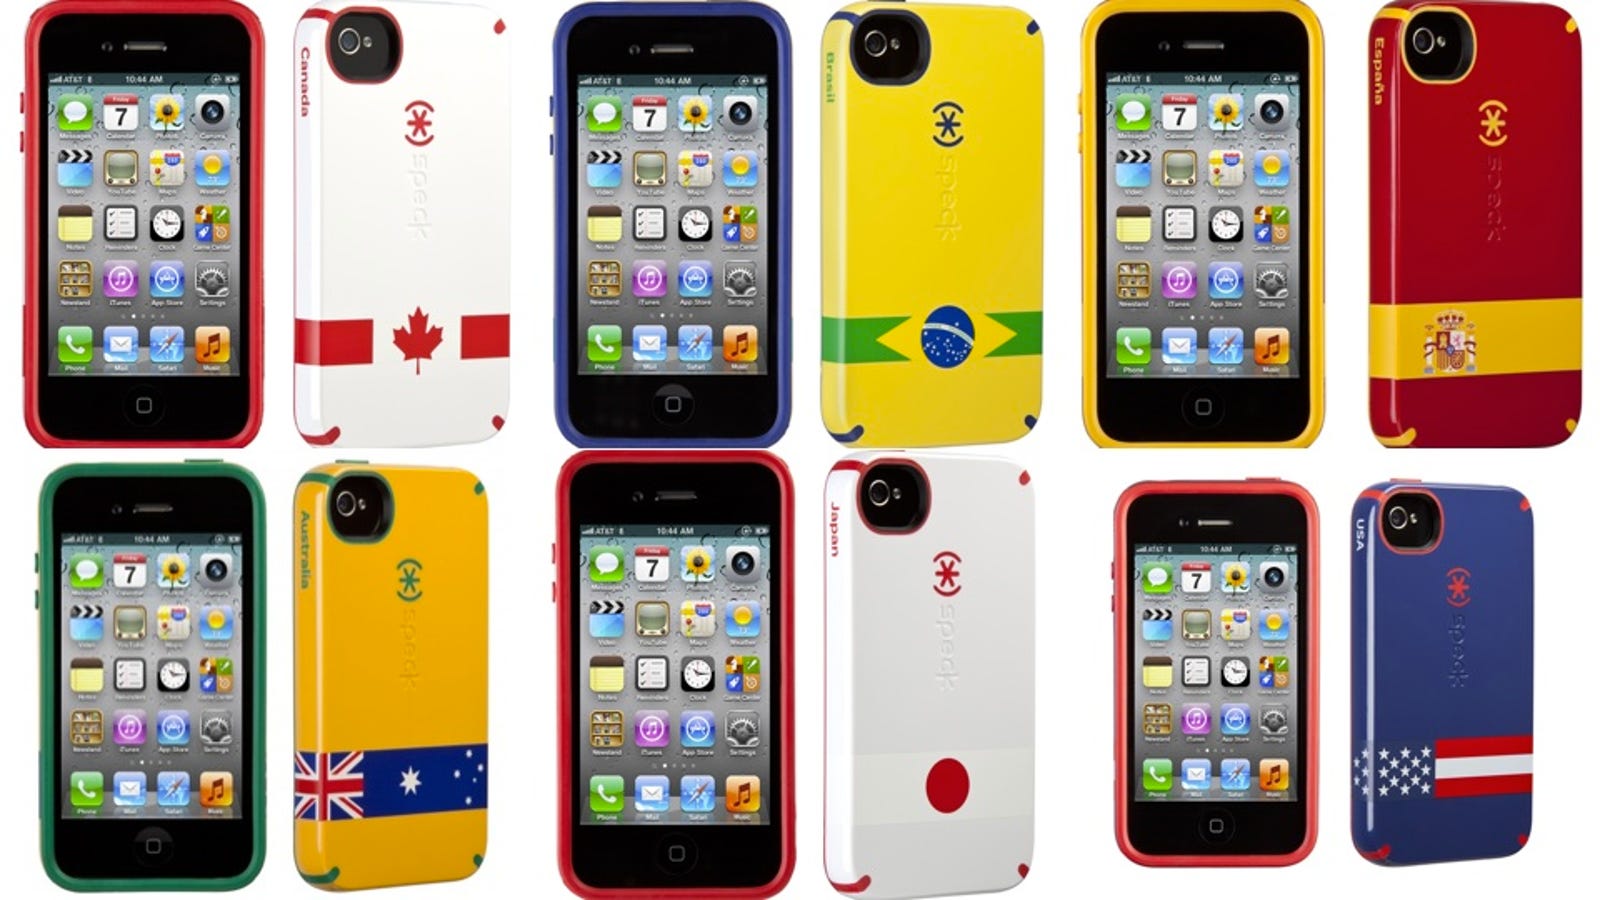 Patriotic Cases Will Have Your iPhone Ready for London 2012